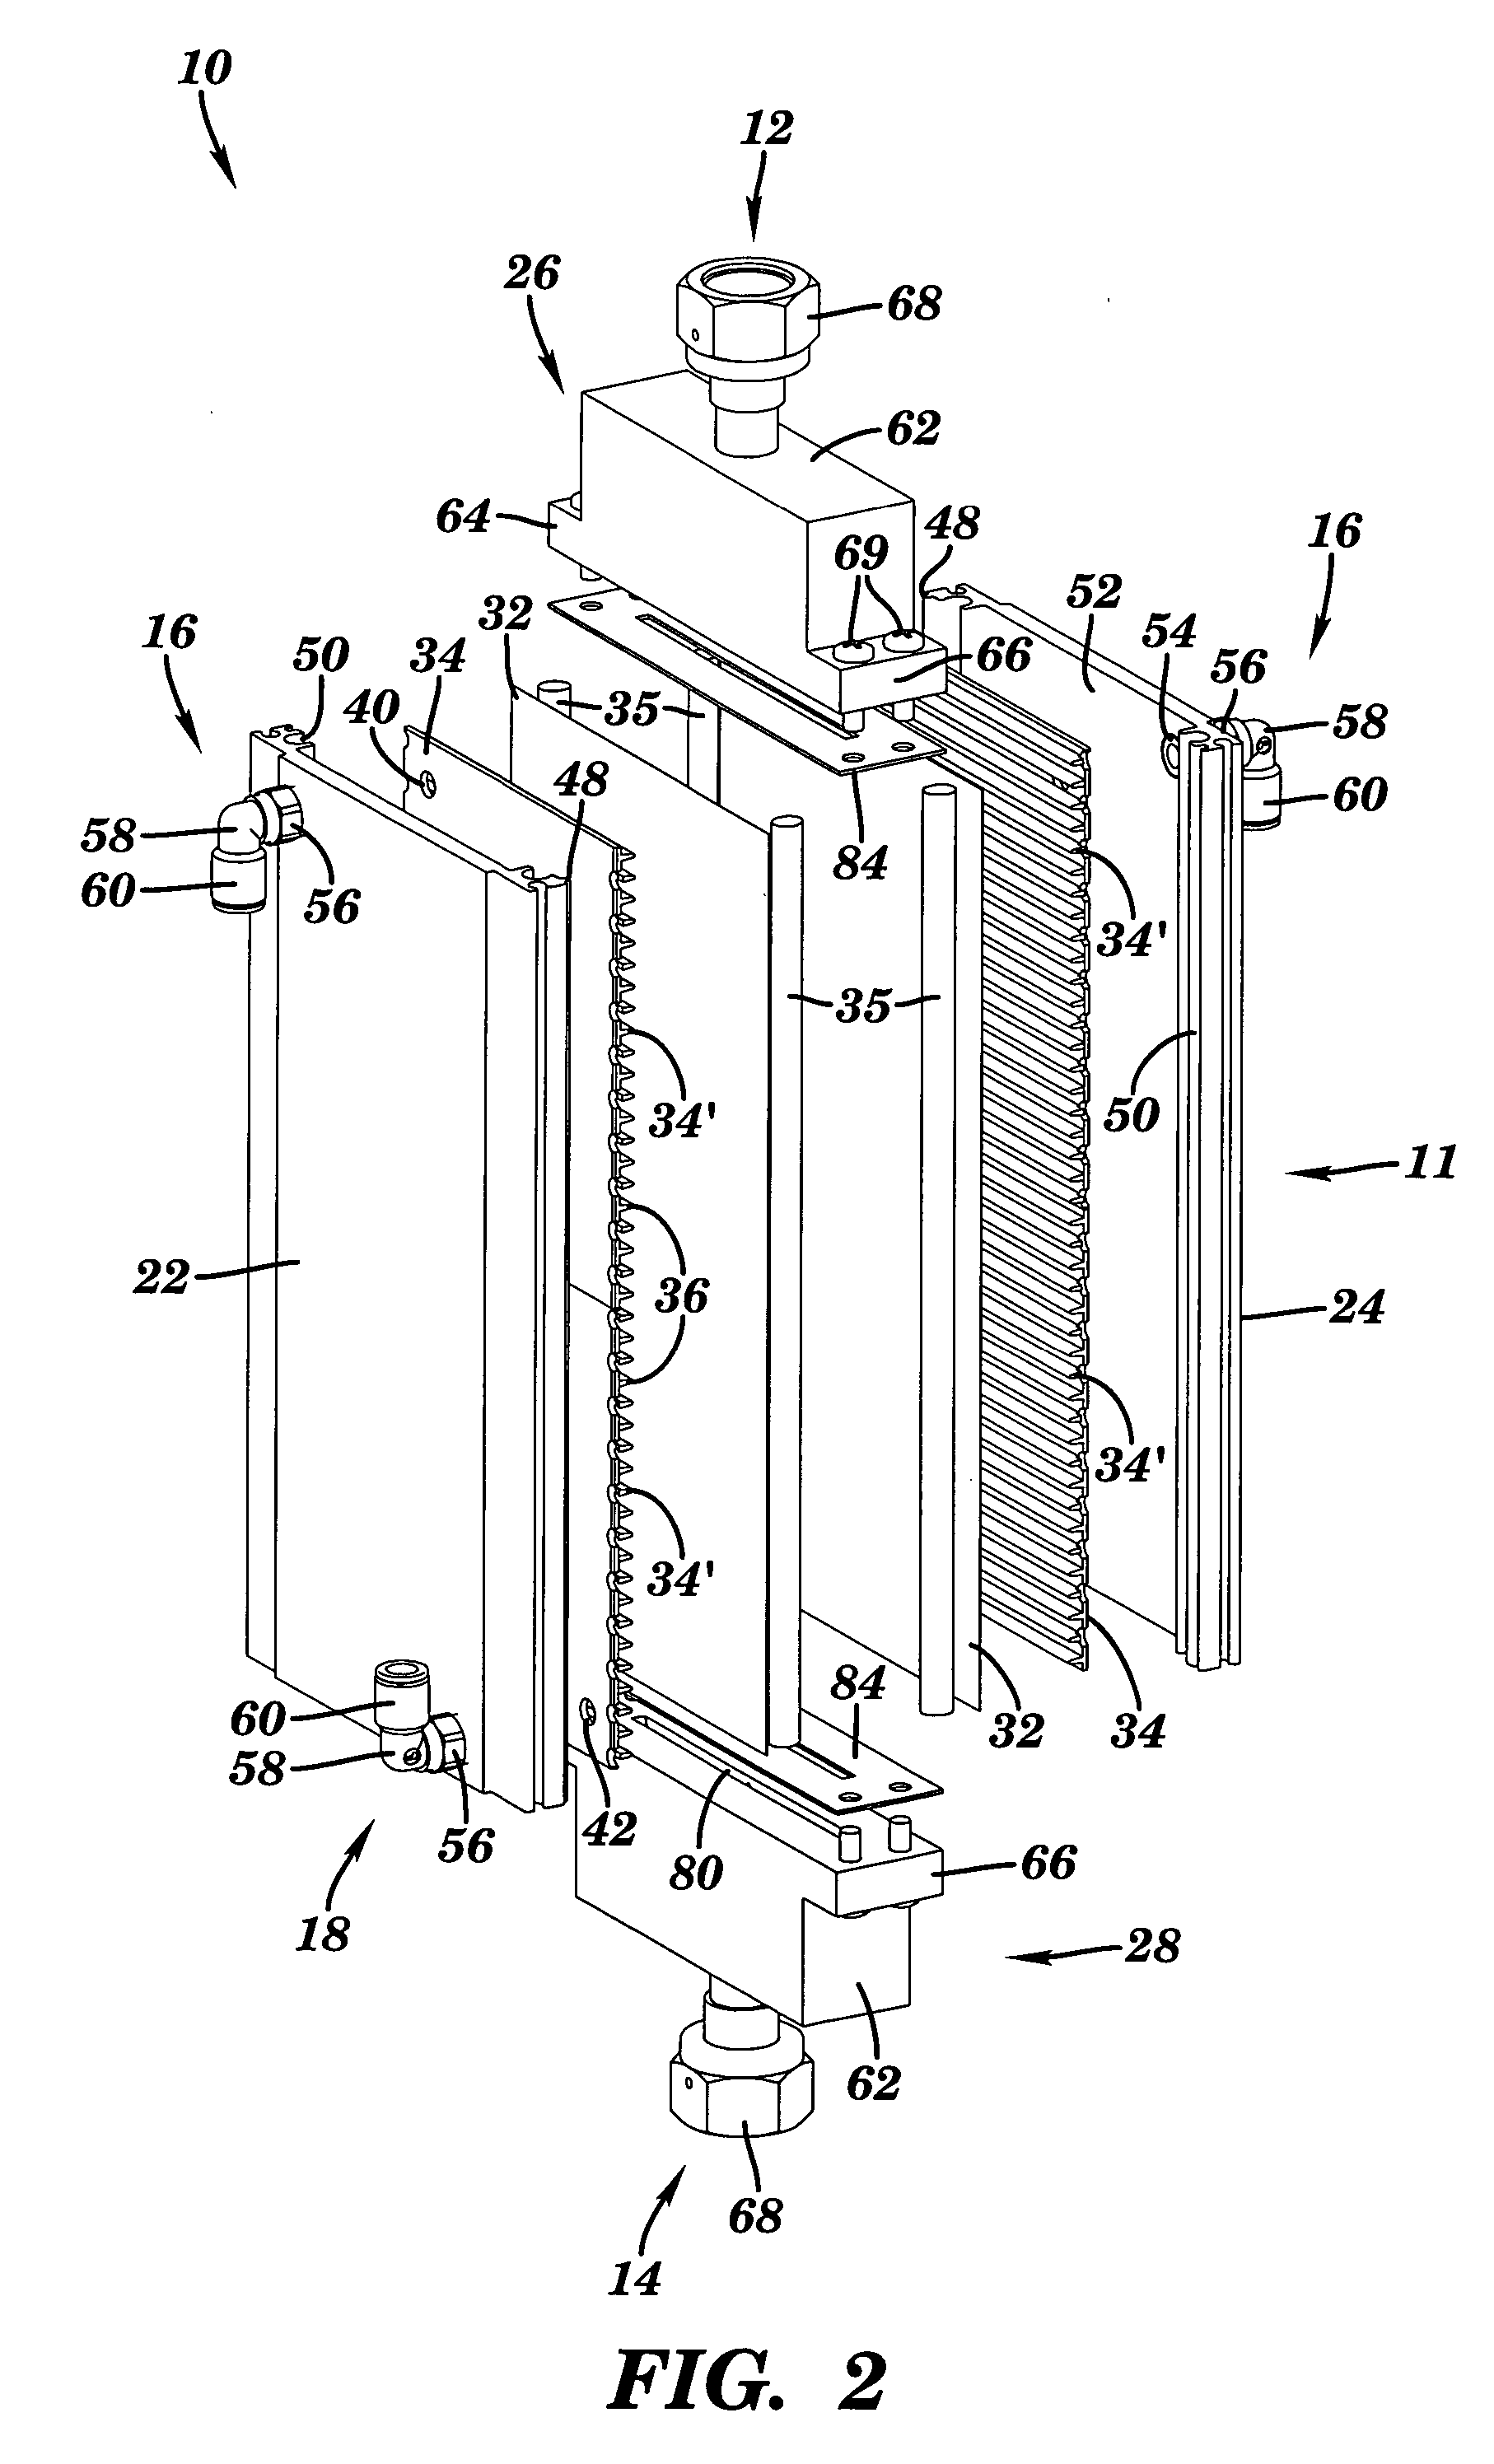 Parallel-plate diffusion gas dehumidifier and methods for use